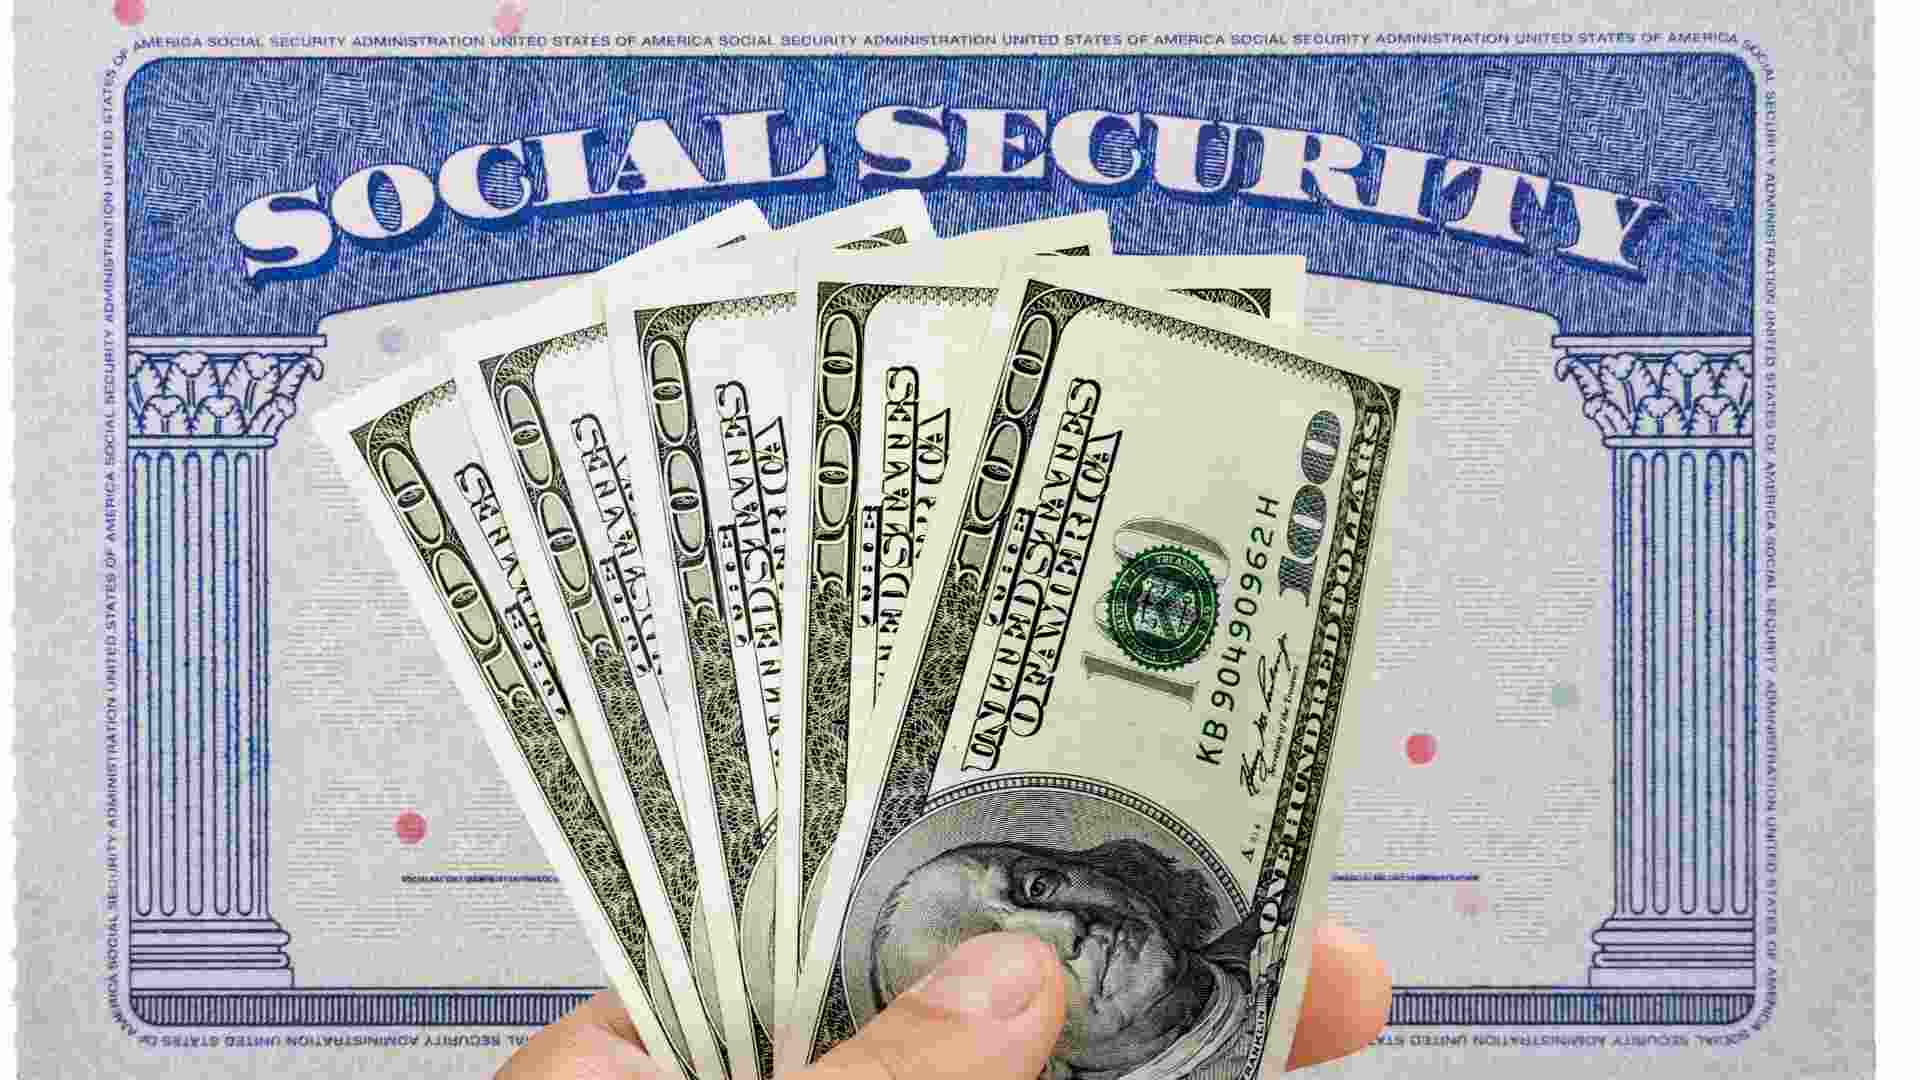 File early if you have saved enough money and have a large Social Security payment